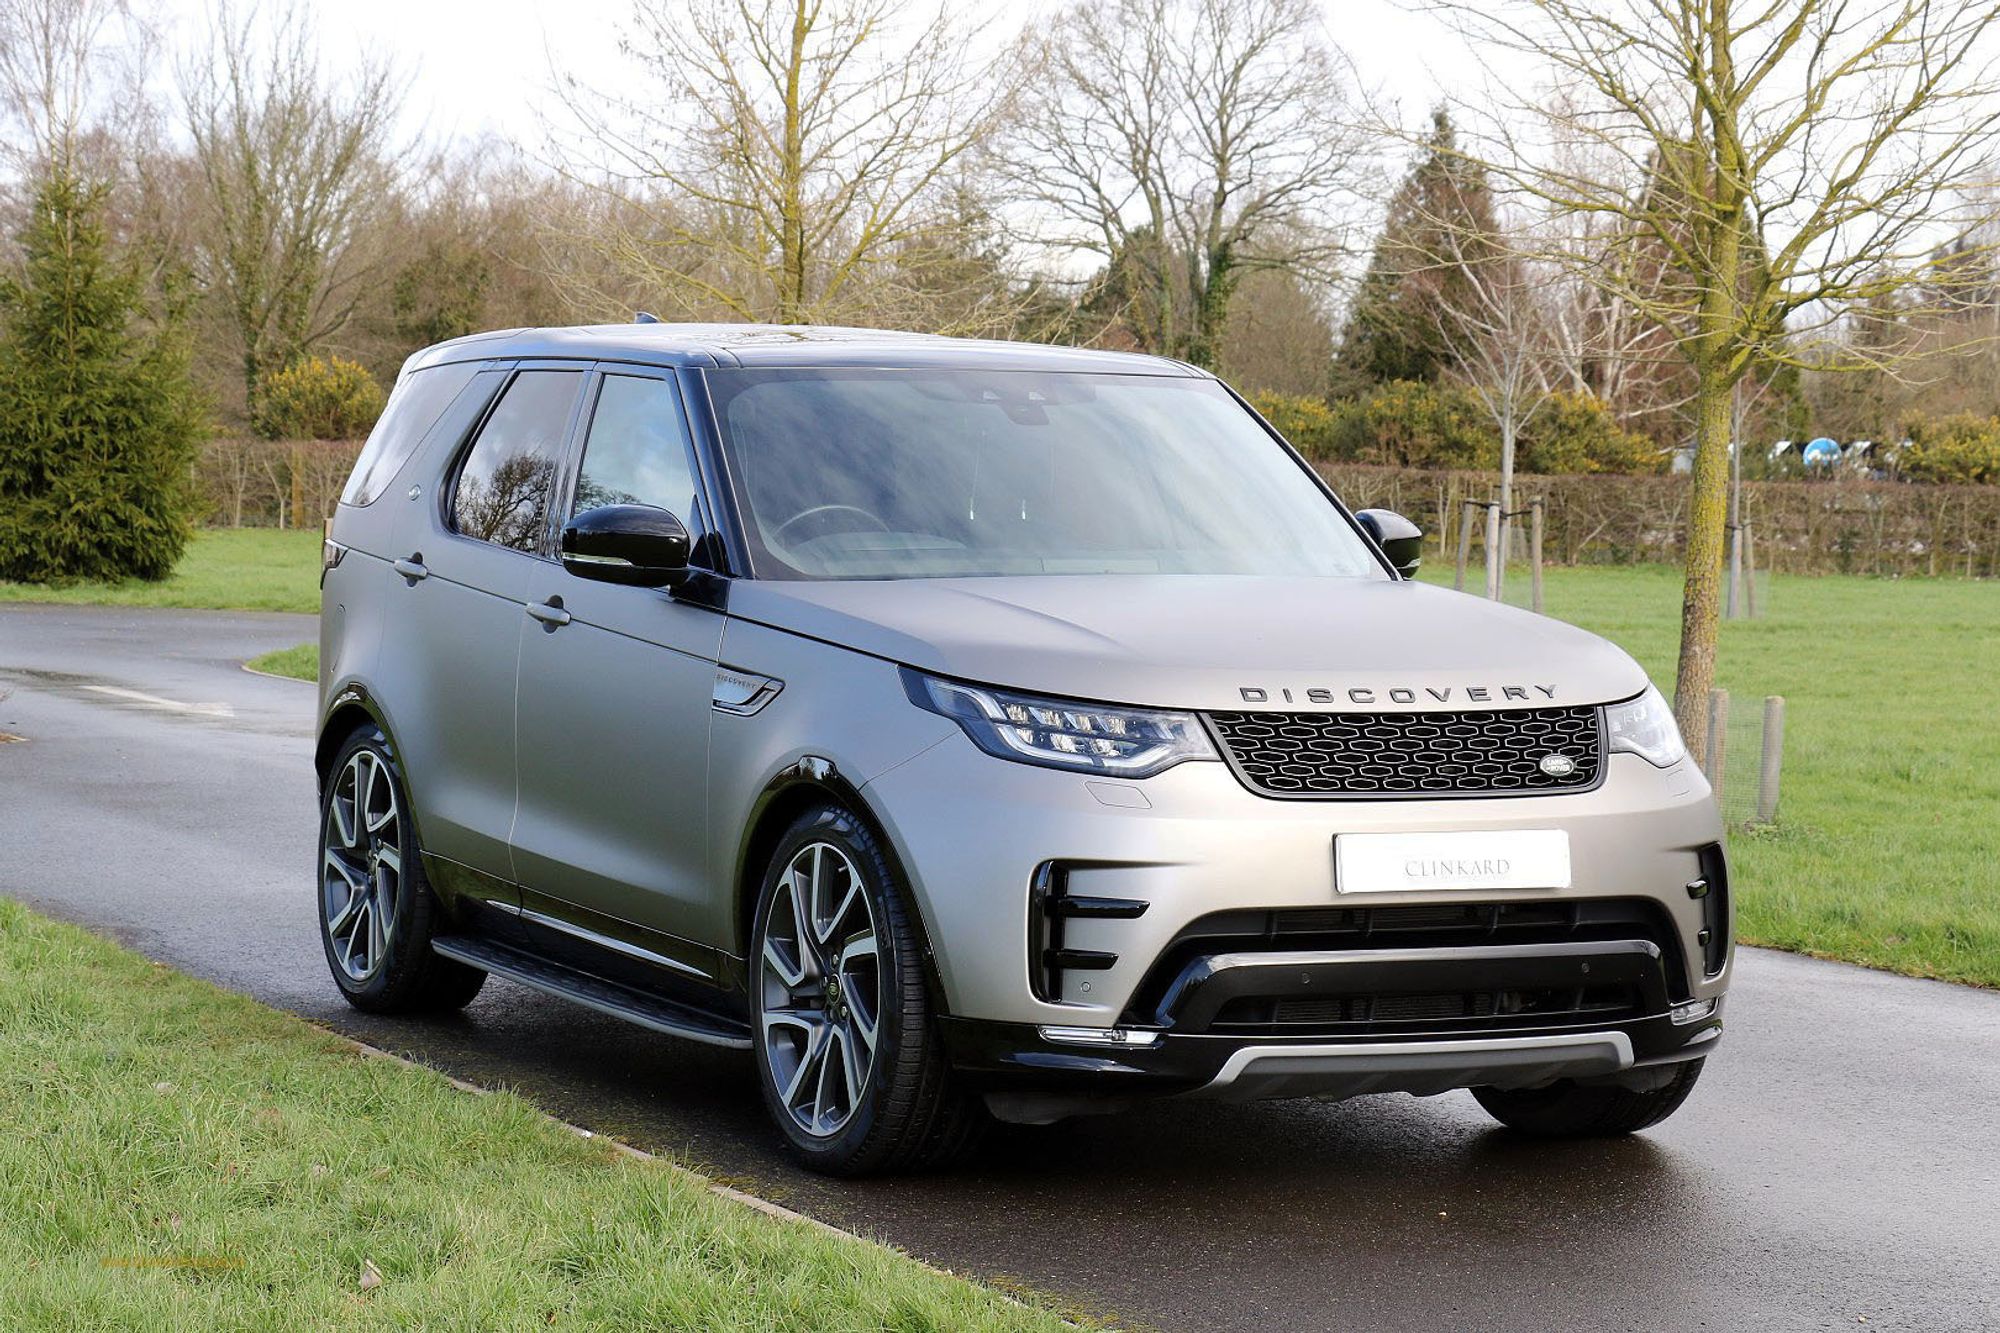 Landrover Discovery Luxury HSE SDV6